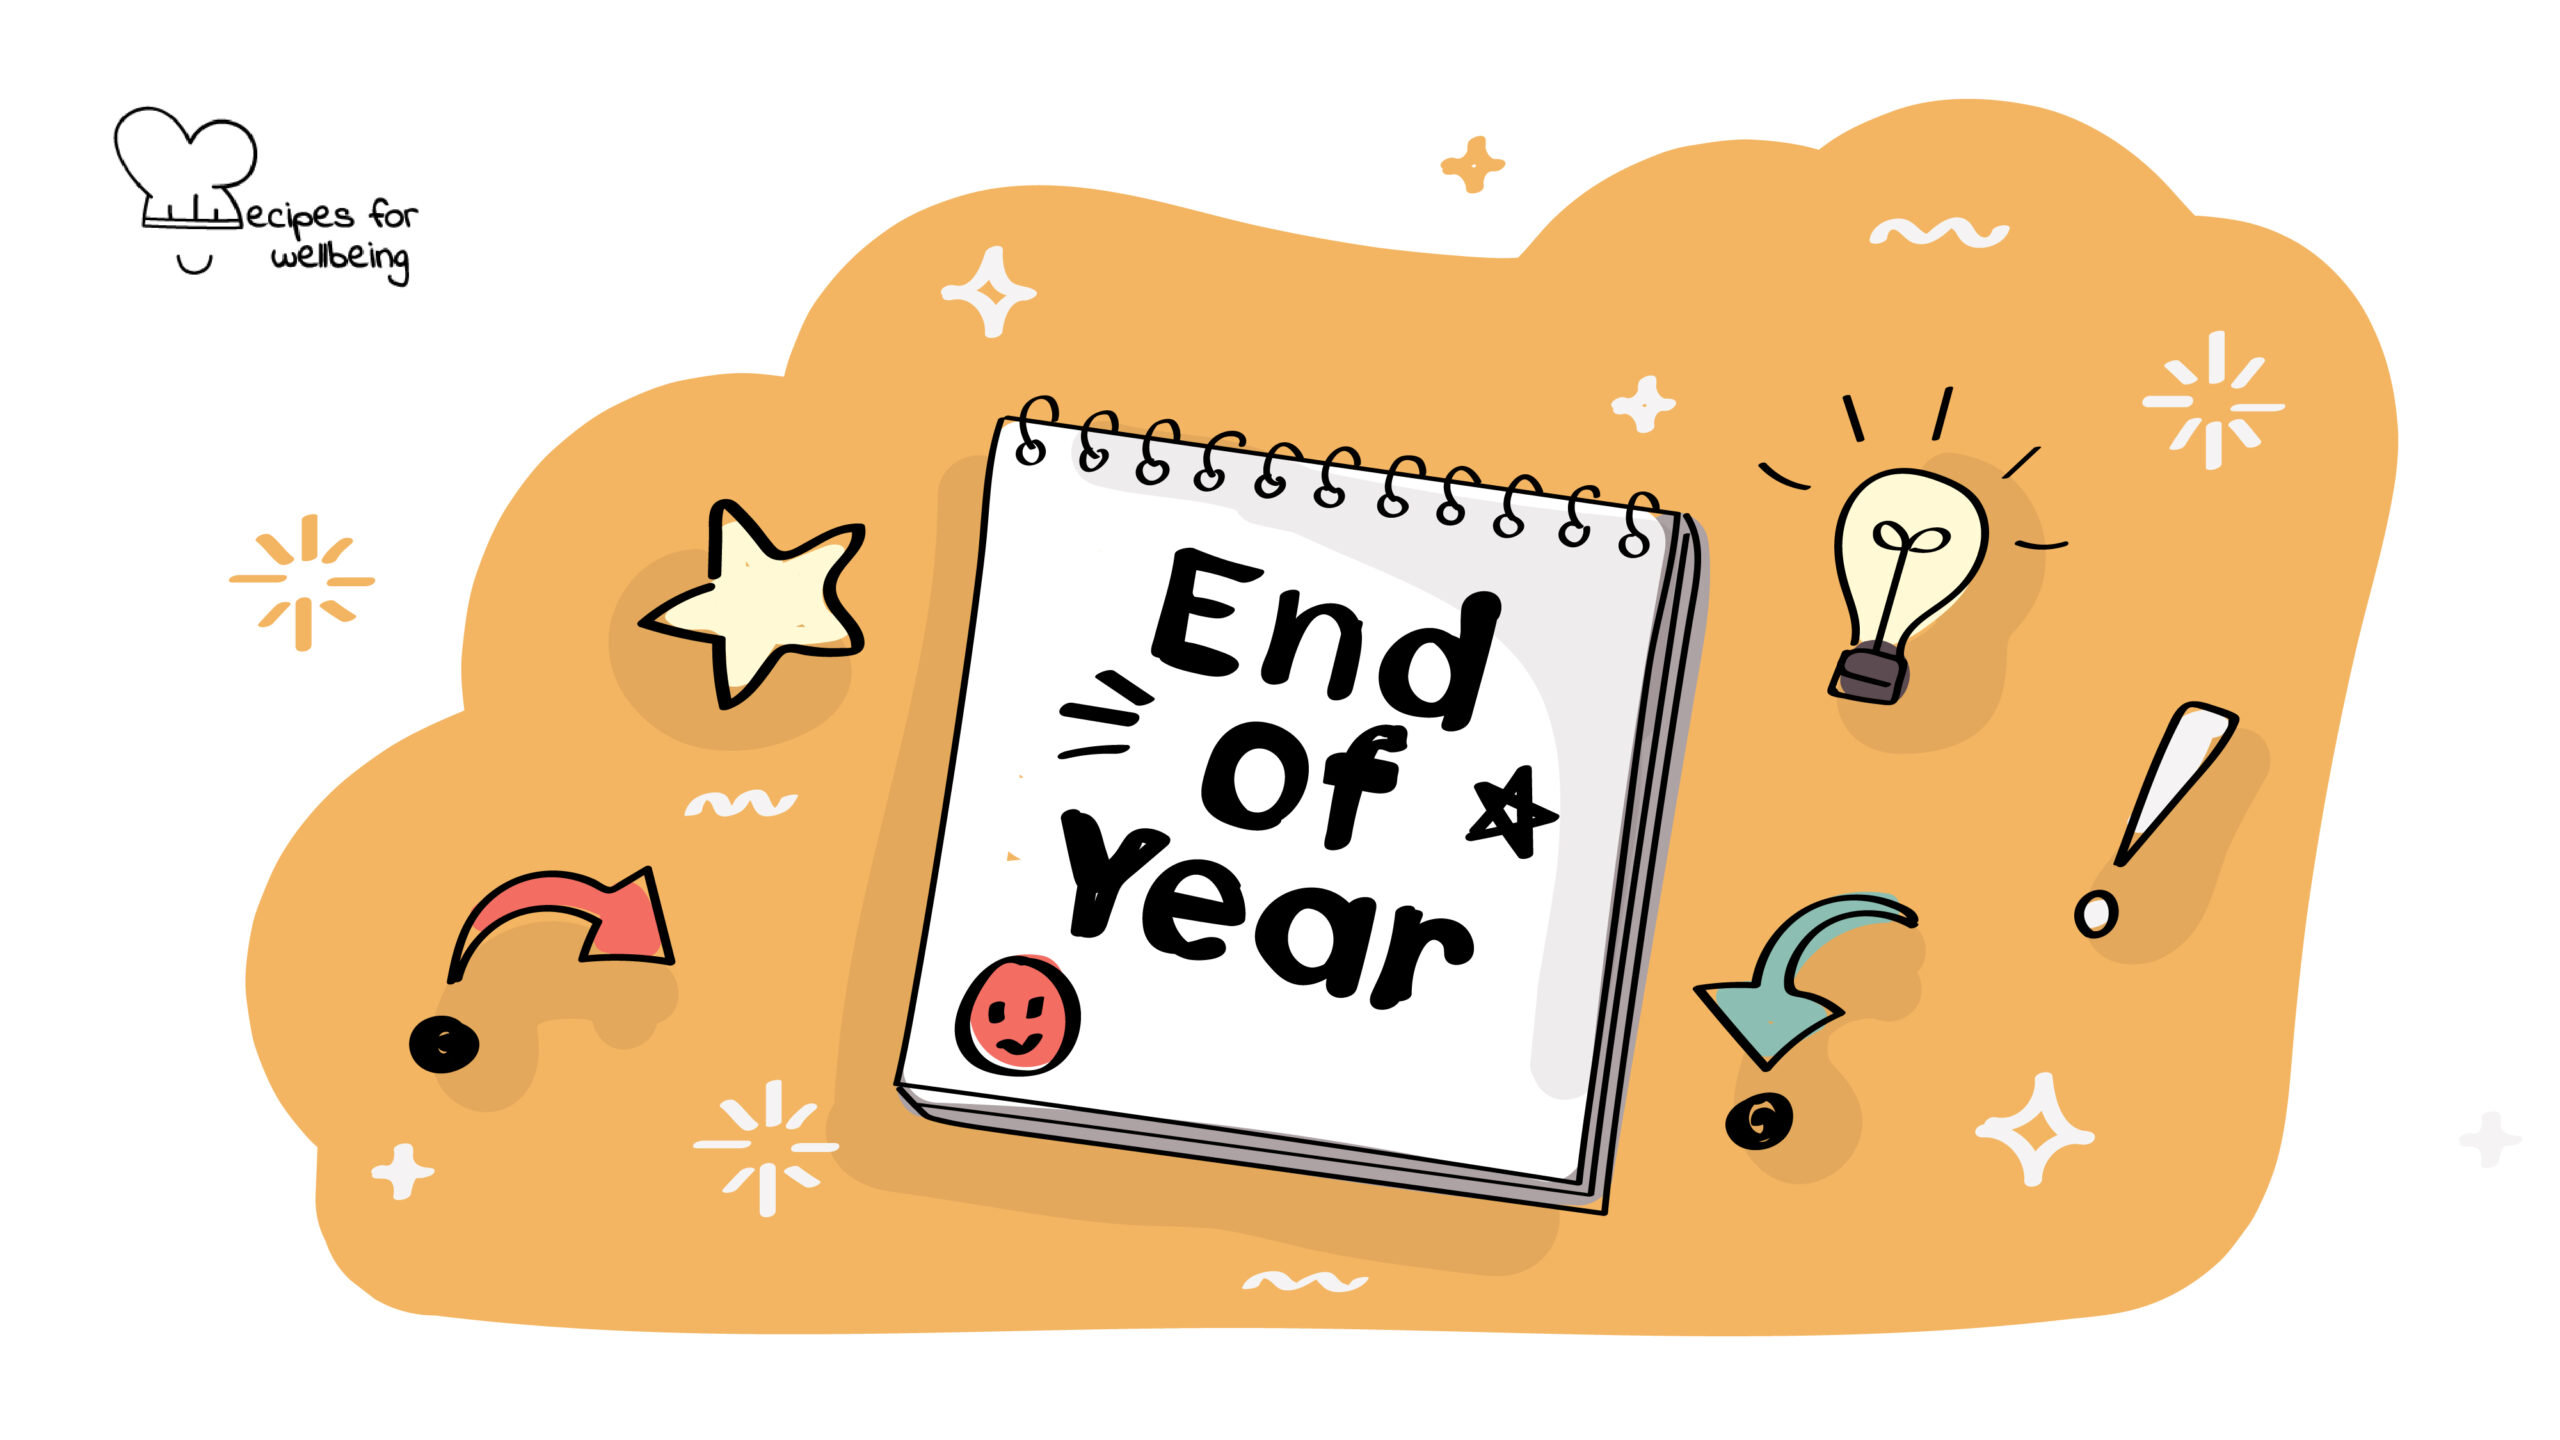 Illustration of a calendar with the words "End of Year" written on it. © Recipes for Wellbeing